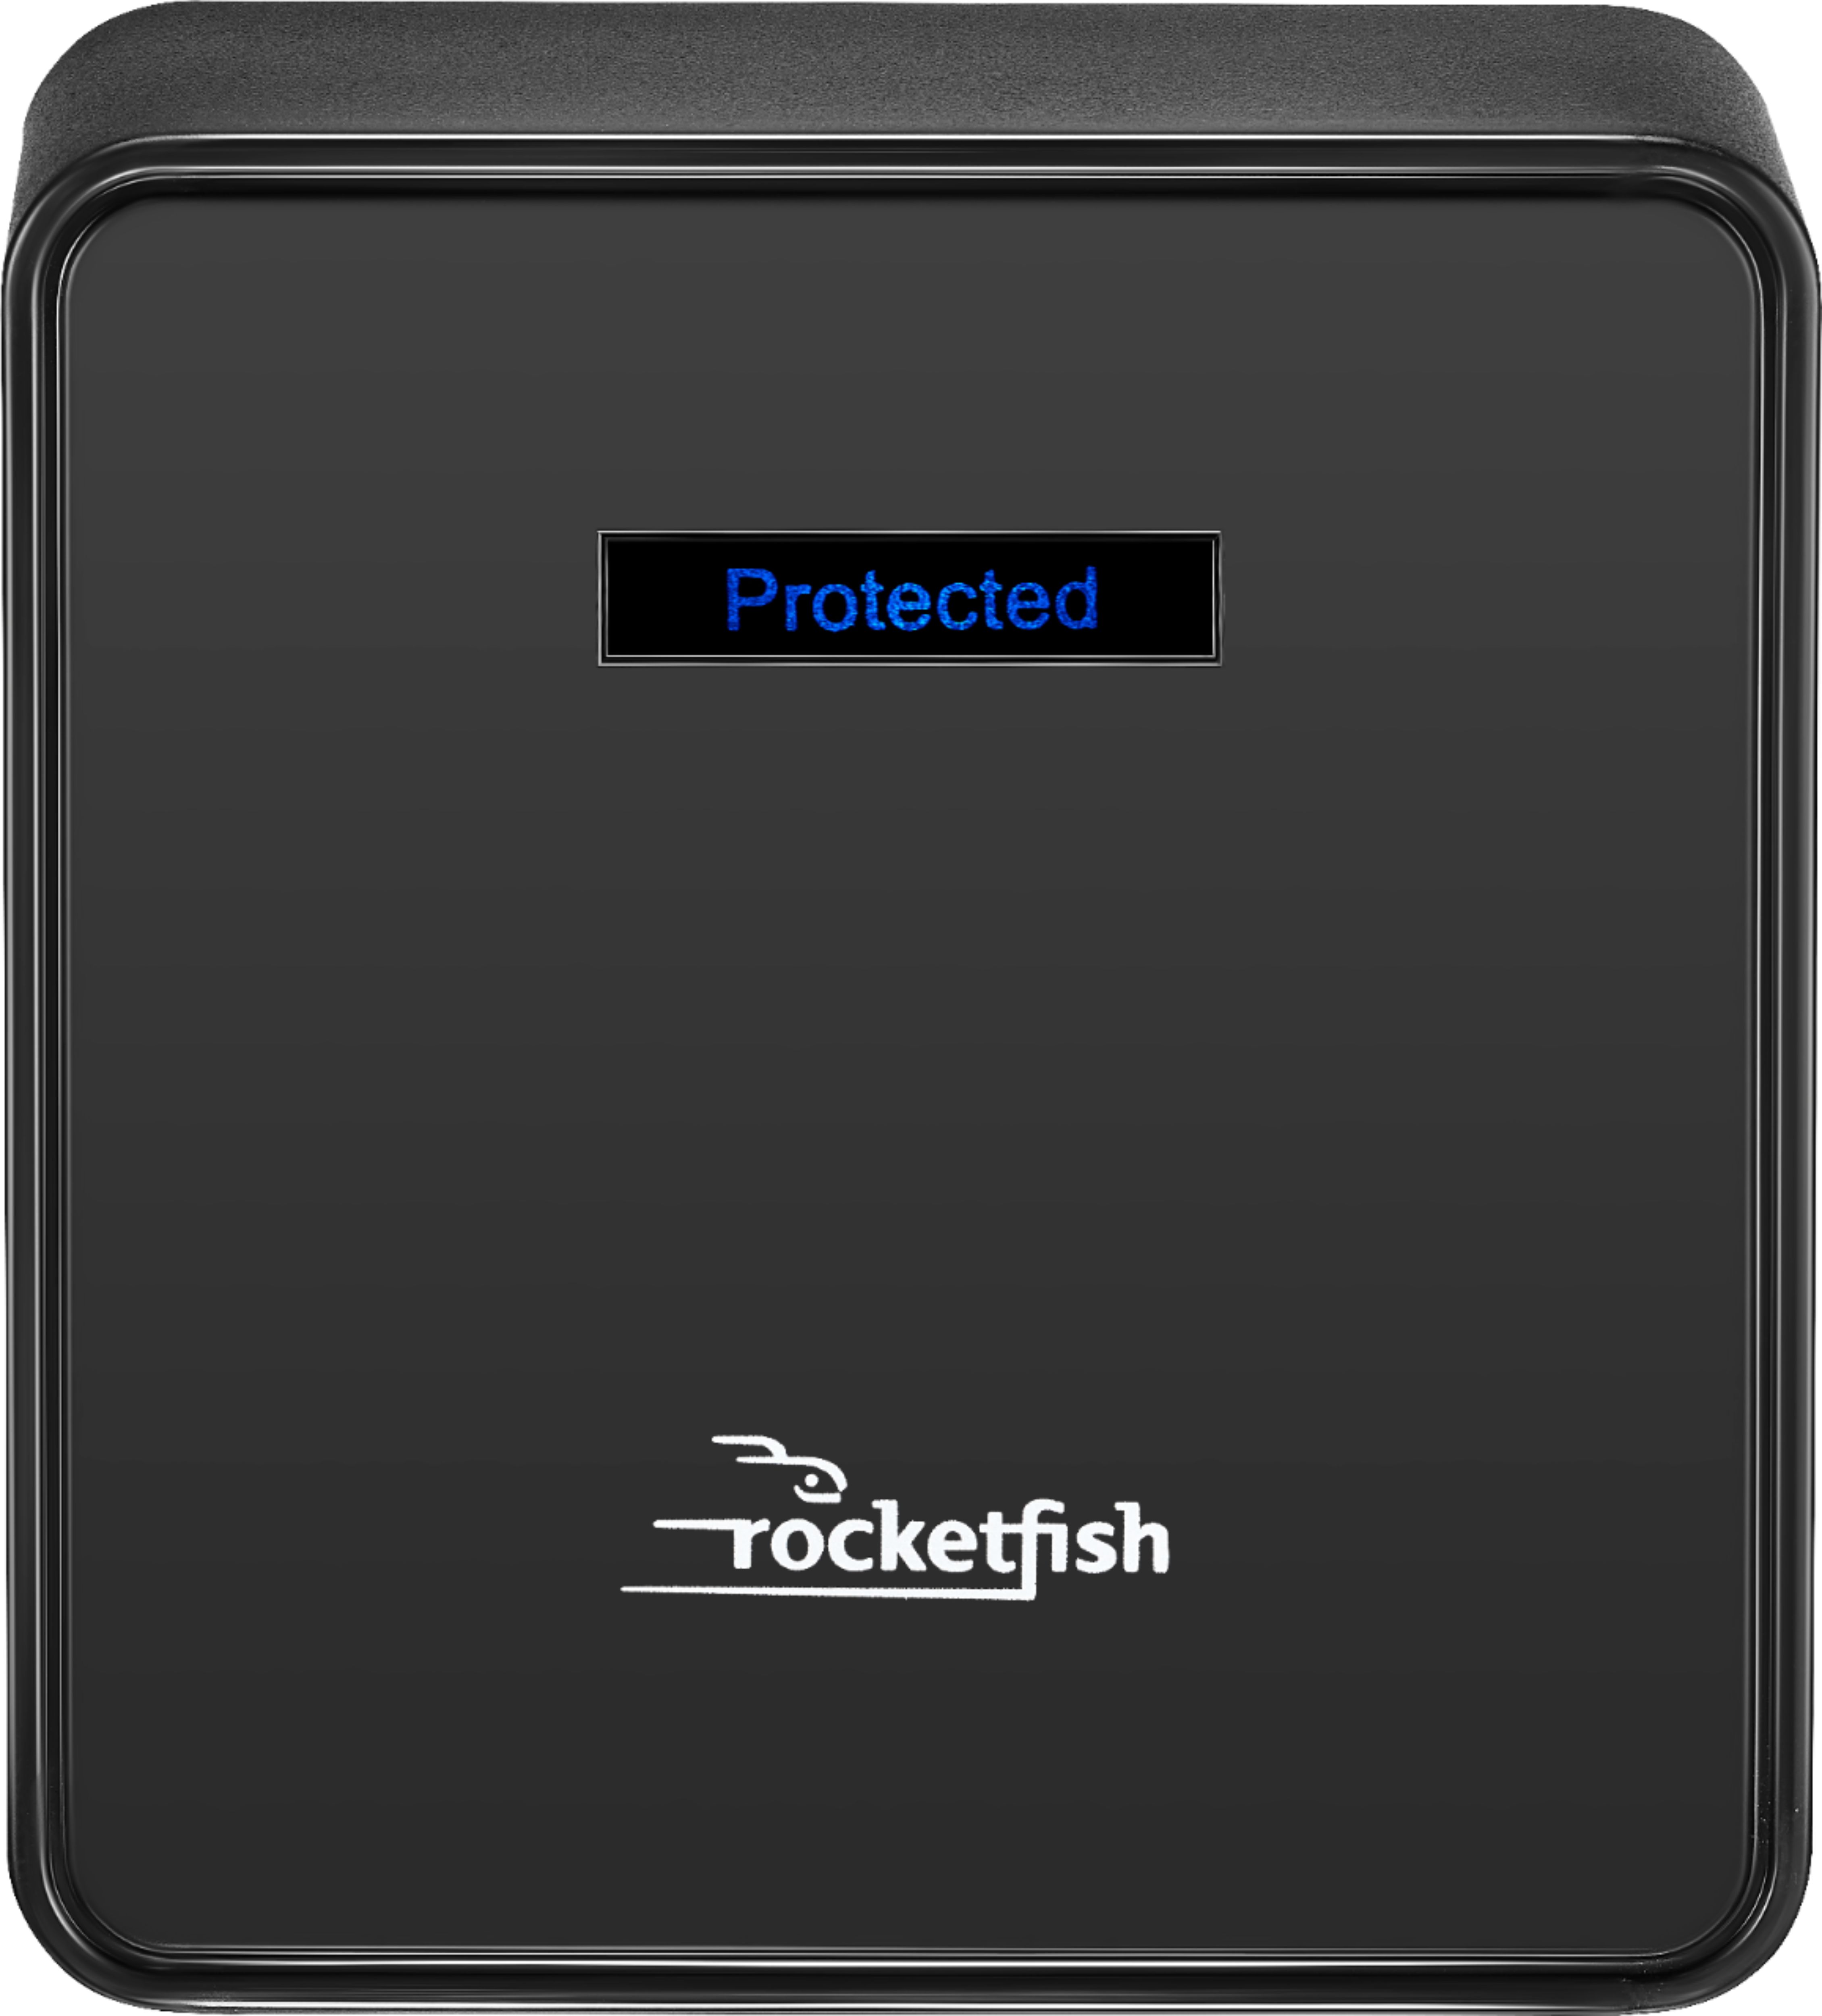 Questions and Answers: Rocketfish™ 2 Outlet Wall Tap 1500 Joules Surge ...